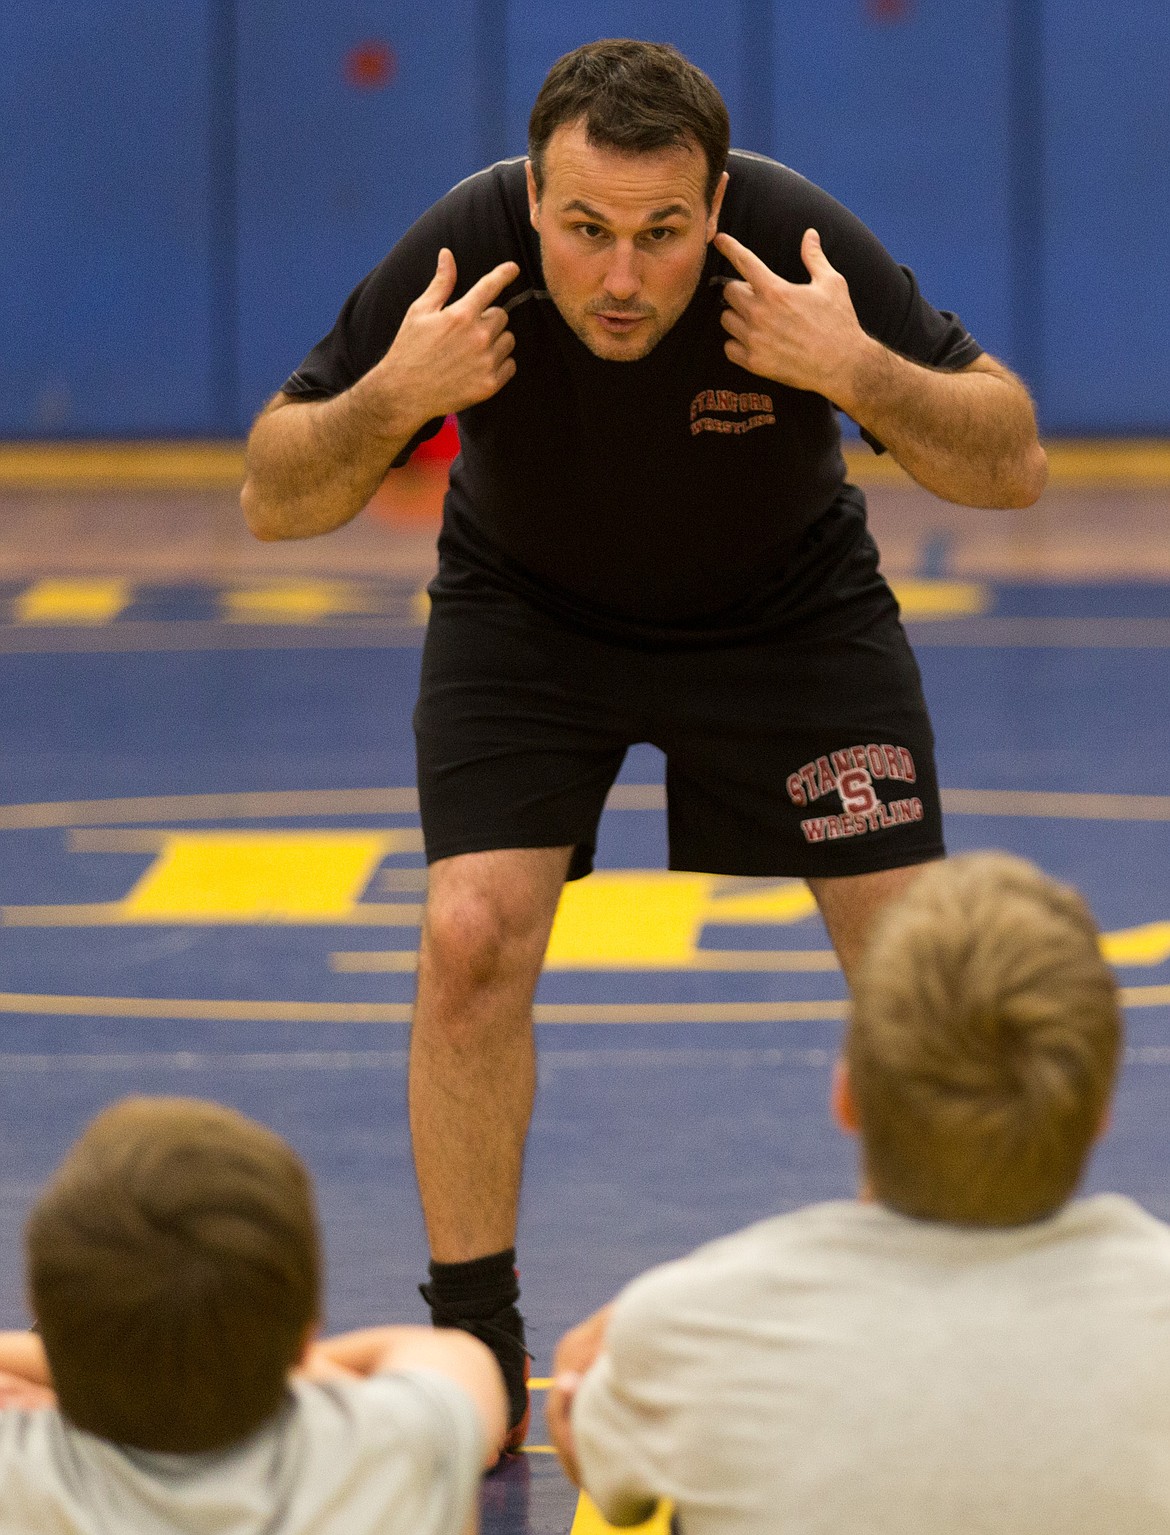 Stanford University wrestling coach Jason Borrelli coaches Libby-area wrestling students during the Greenchain Wrestling Camp at Libby Elementary School on Sunday, June 11, 2017.